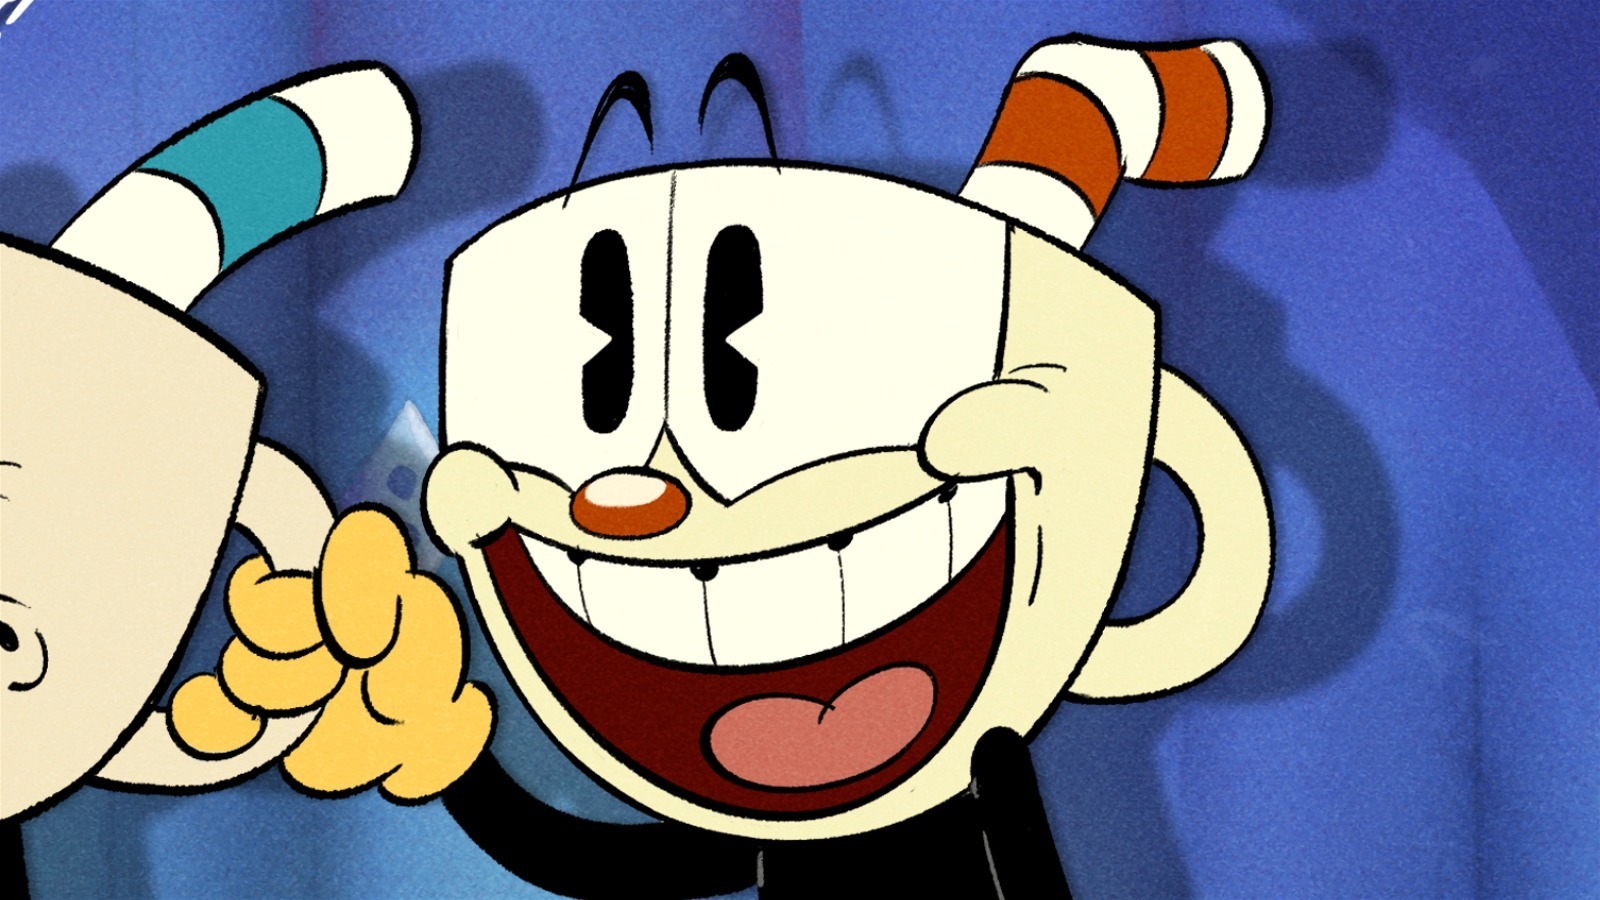 The Cuphead Show but only King Dice (COMPLETE) 